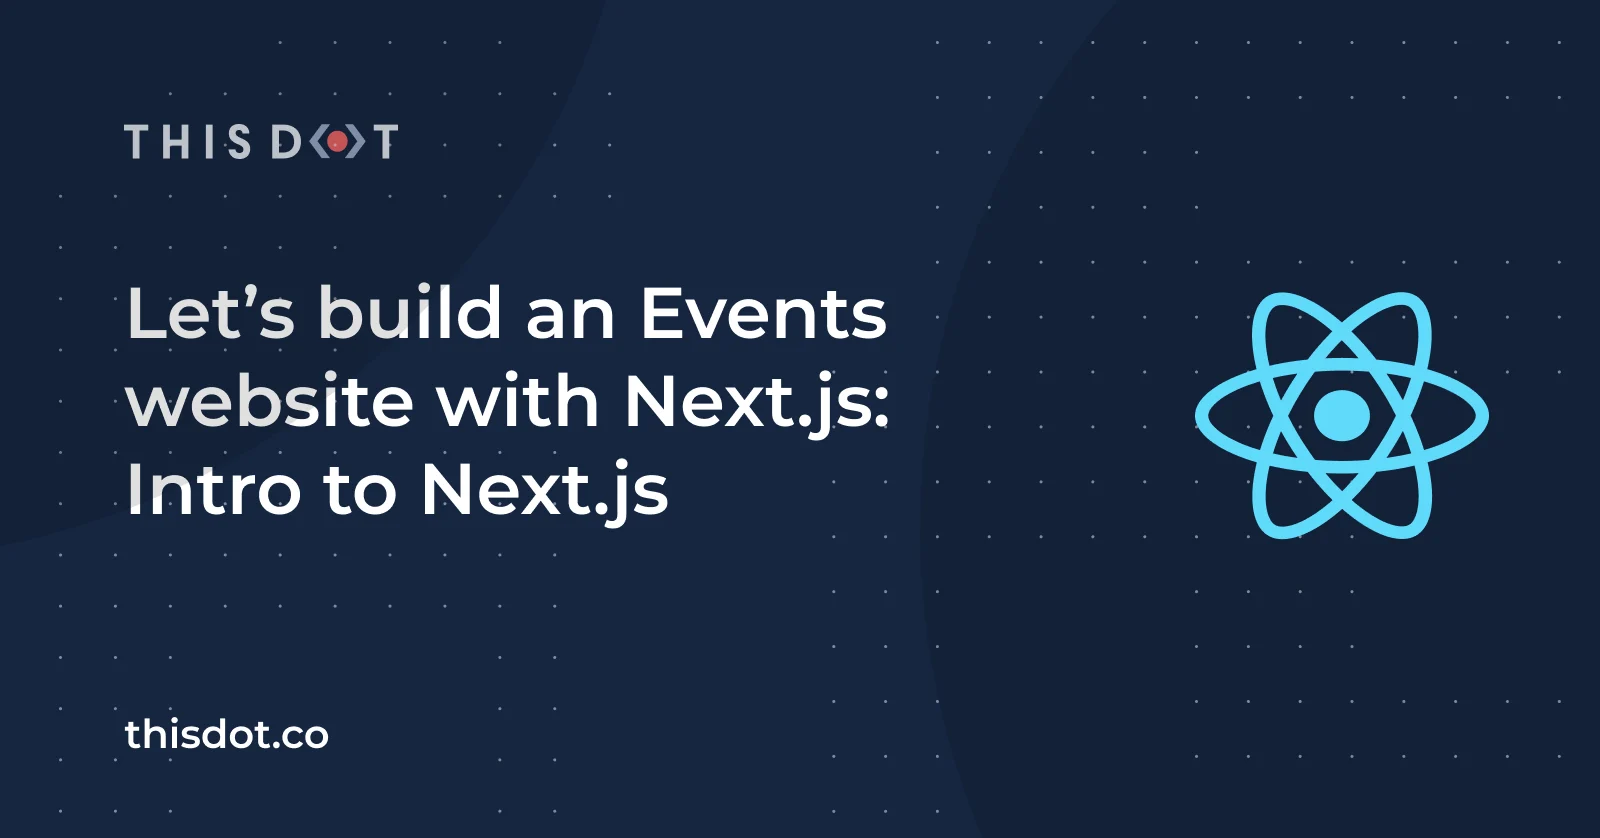 Let’s build an Events website with Next.js: Intro to Next.js cover image